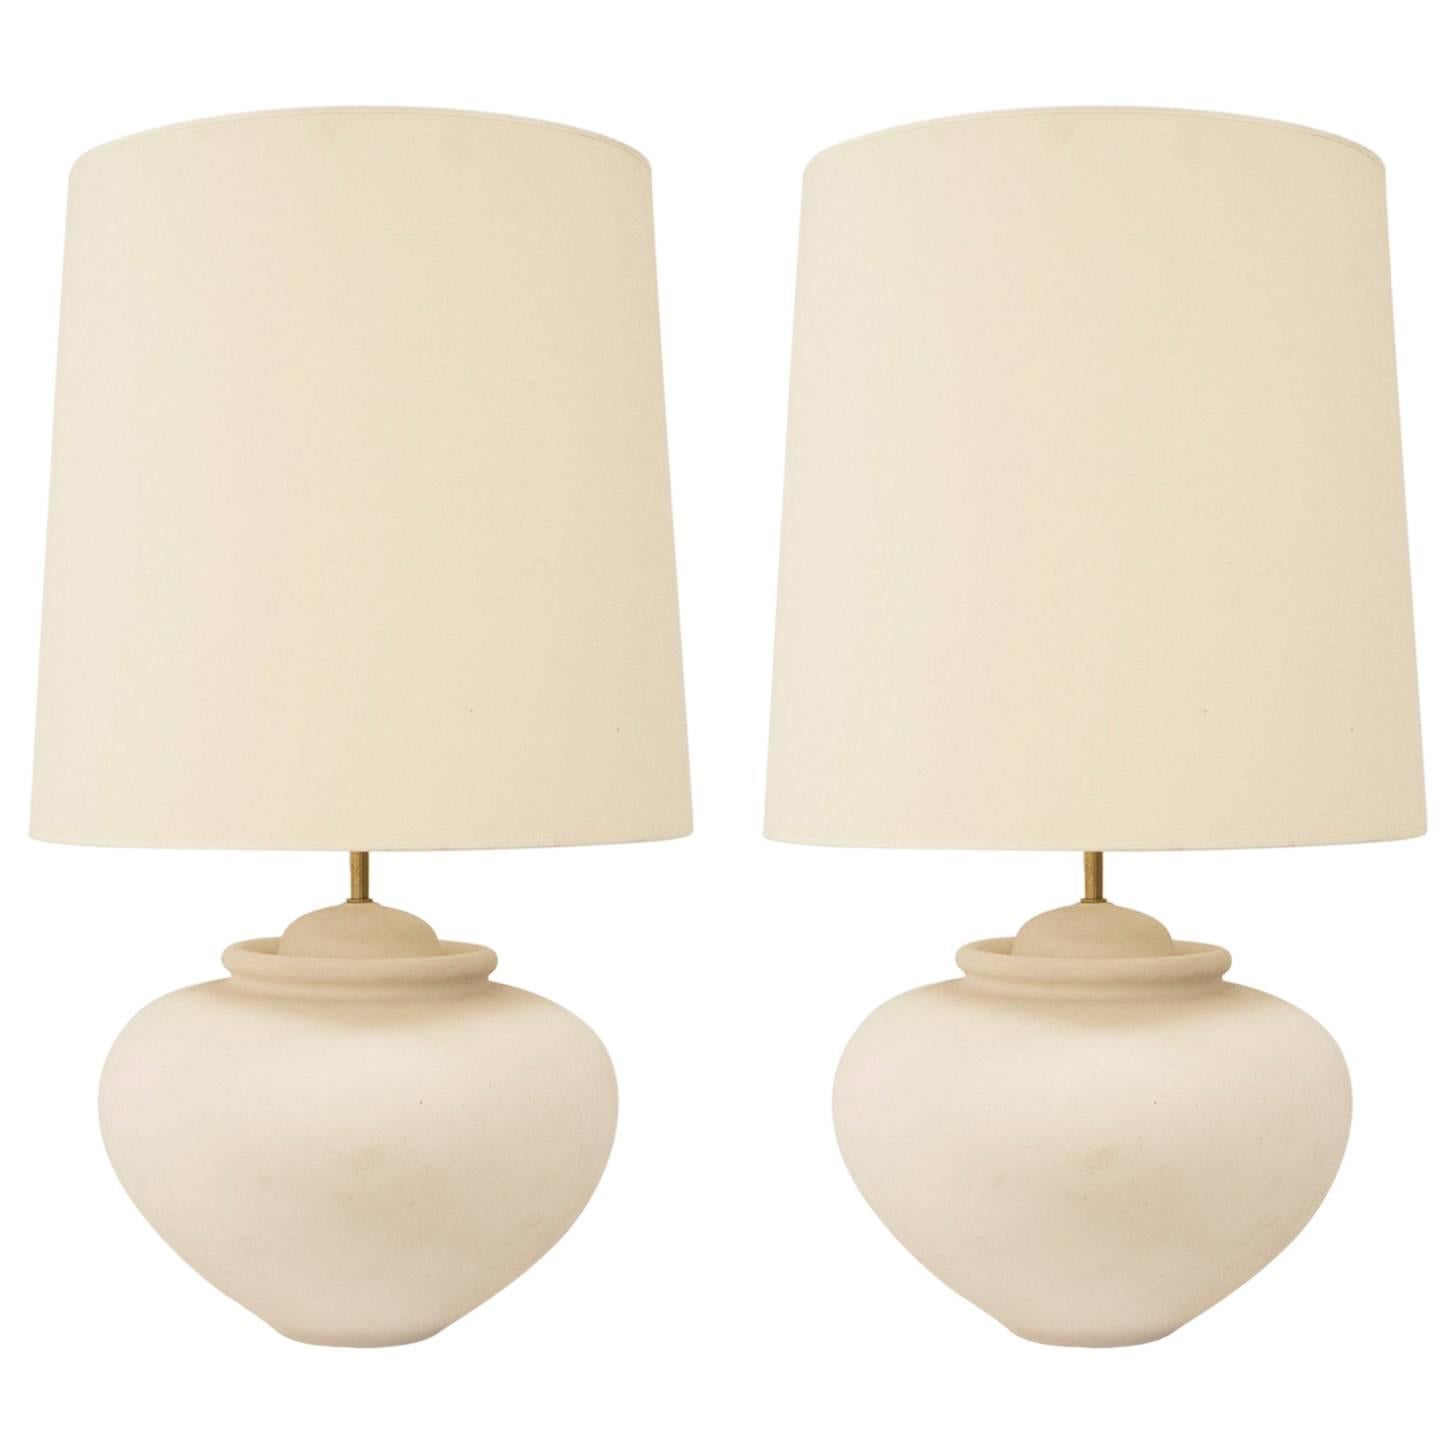 Desvres Manufacture, Pair of Lamps in Plaster, France, circa 1950 For Sale